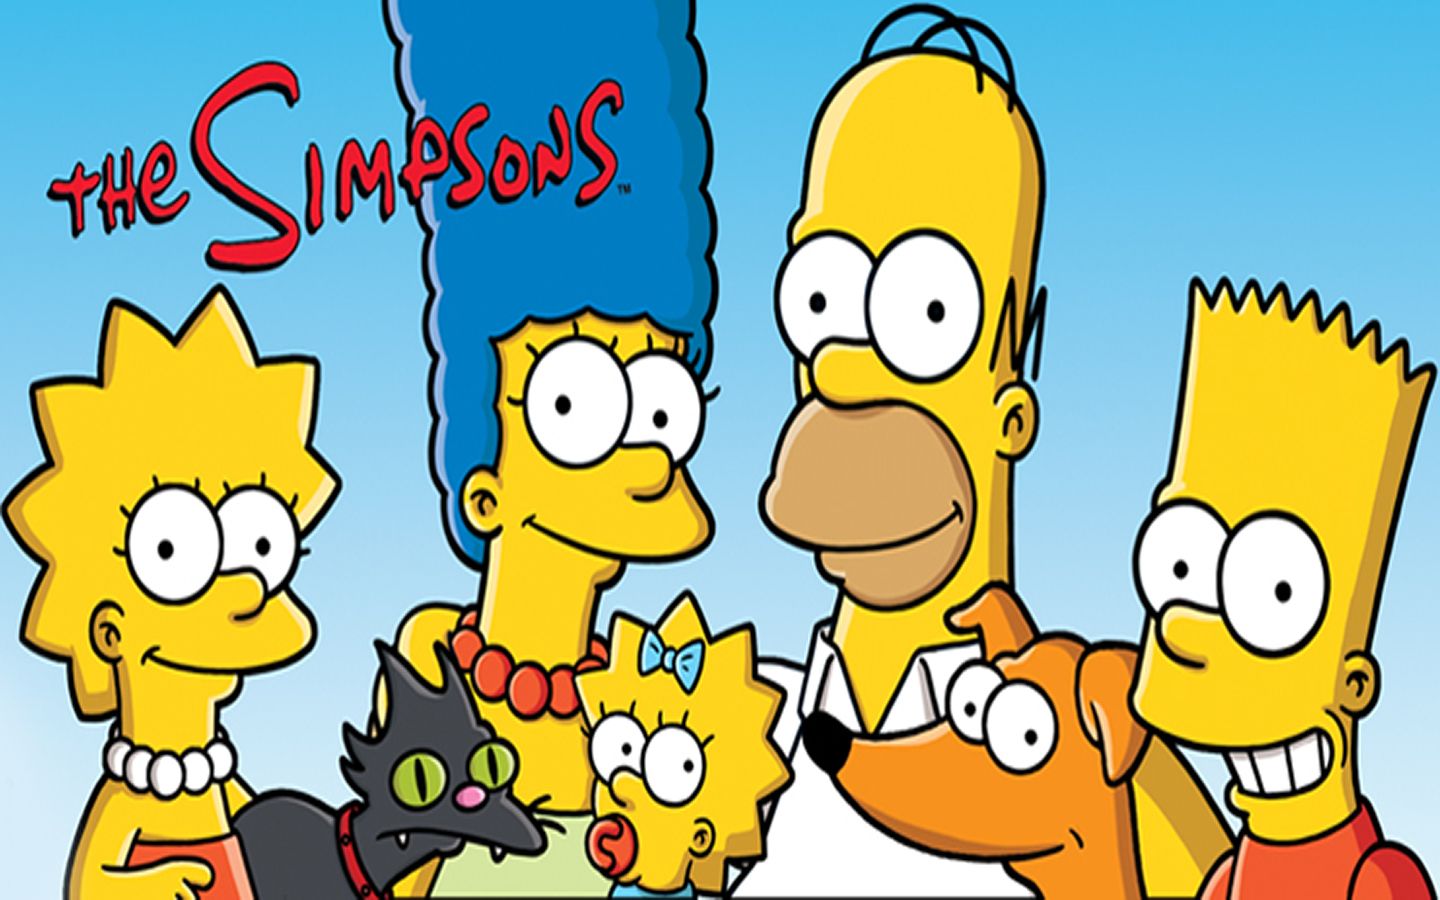 The Simpsons Family Introduction HD Wallpaper for Tablet